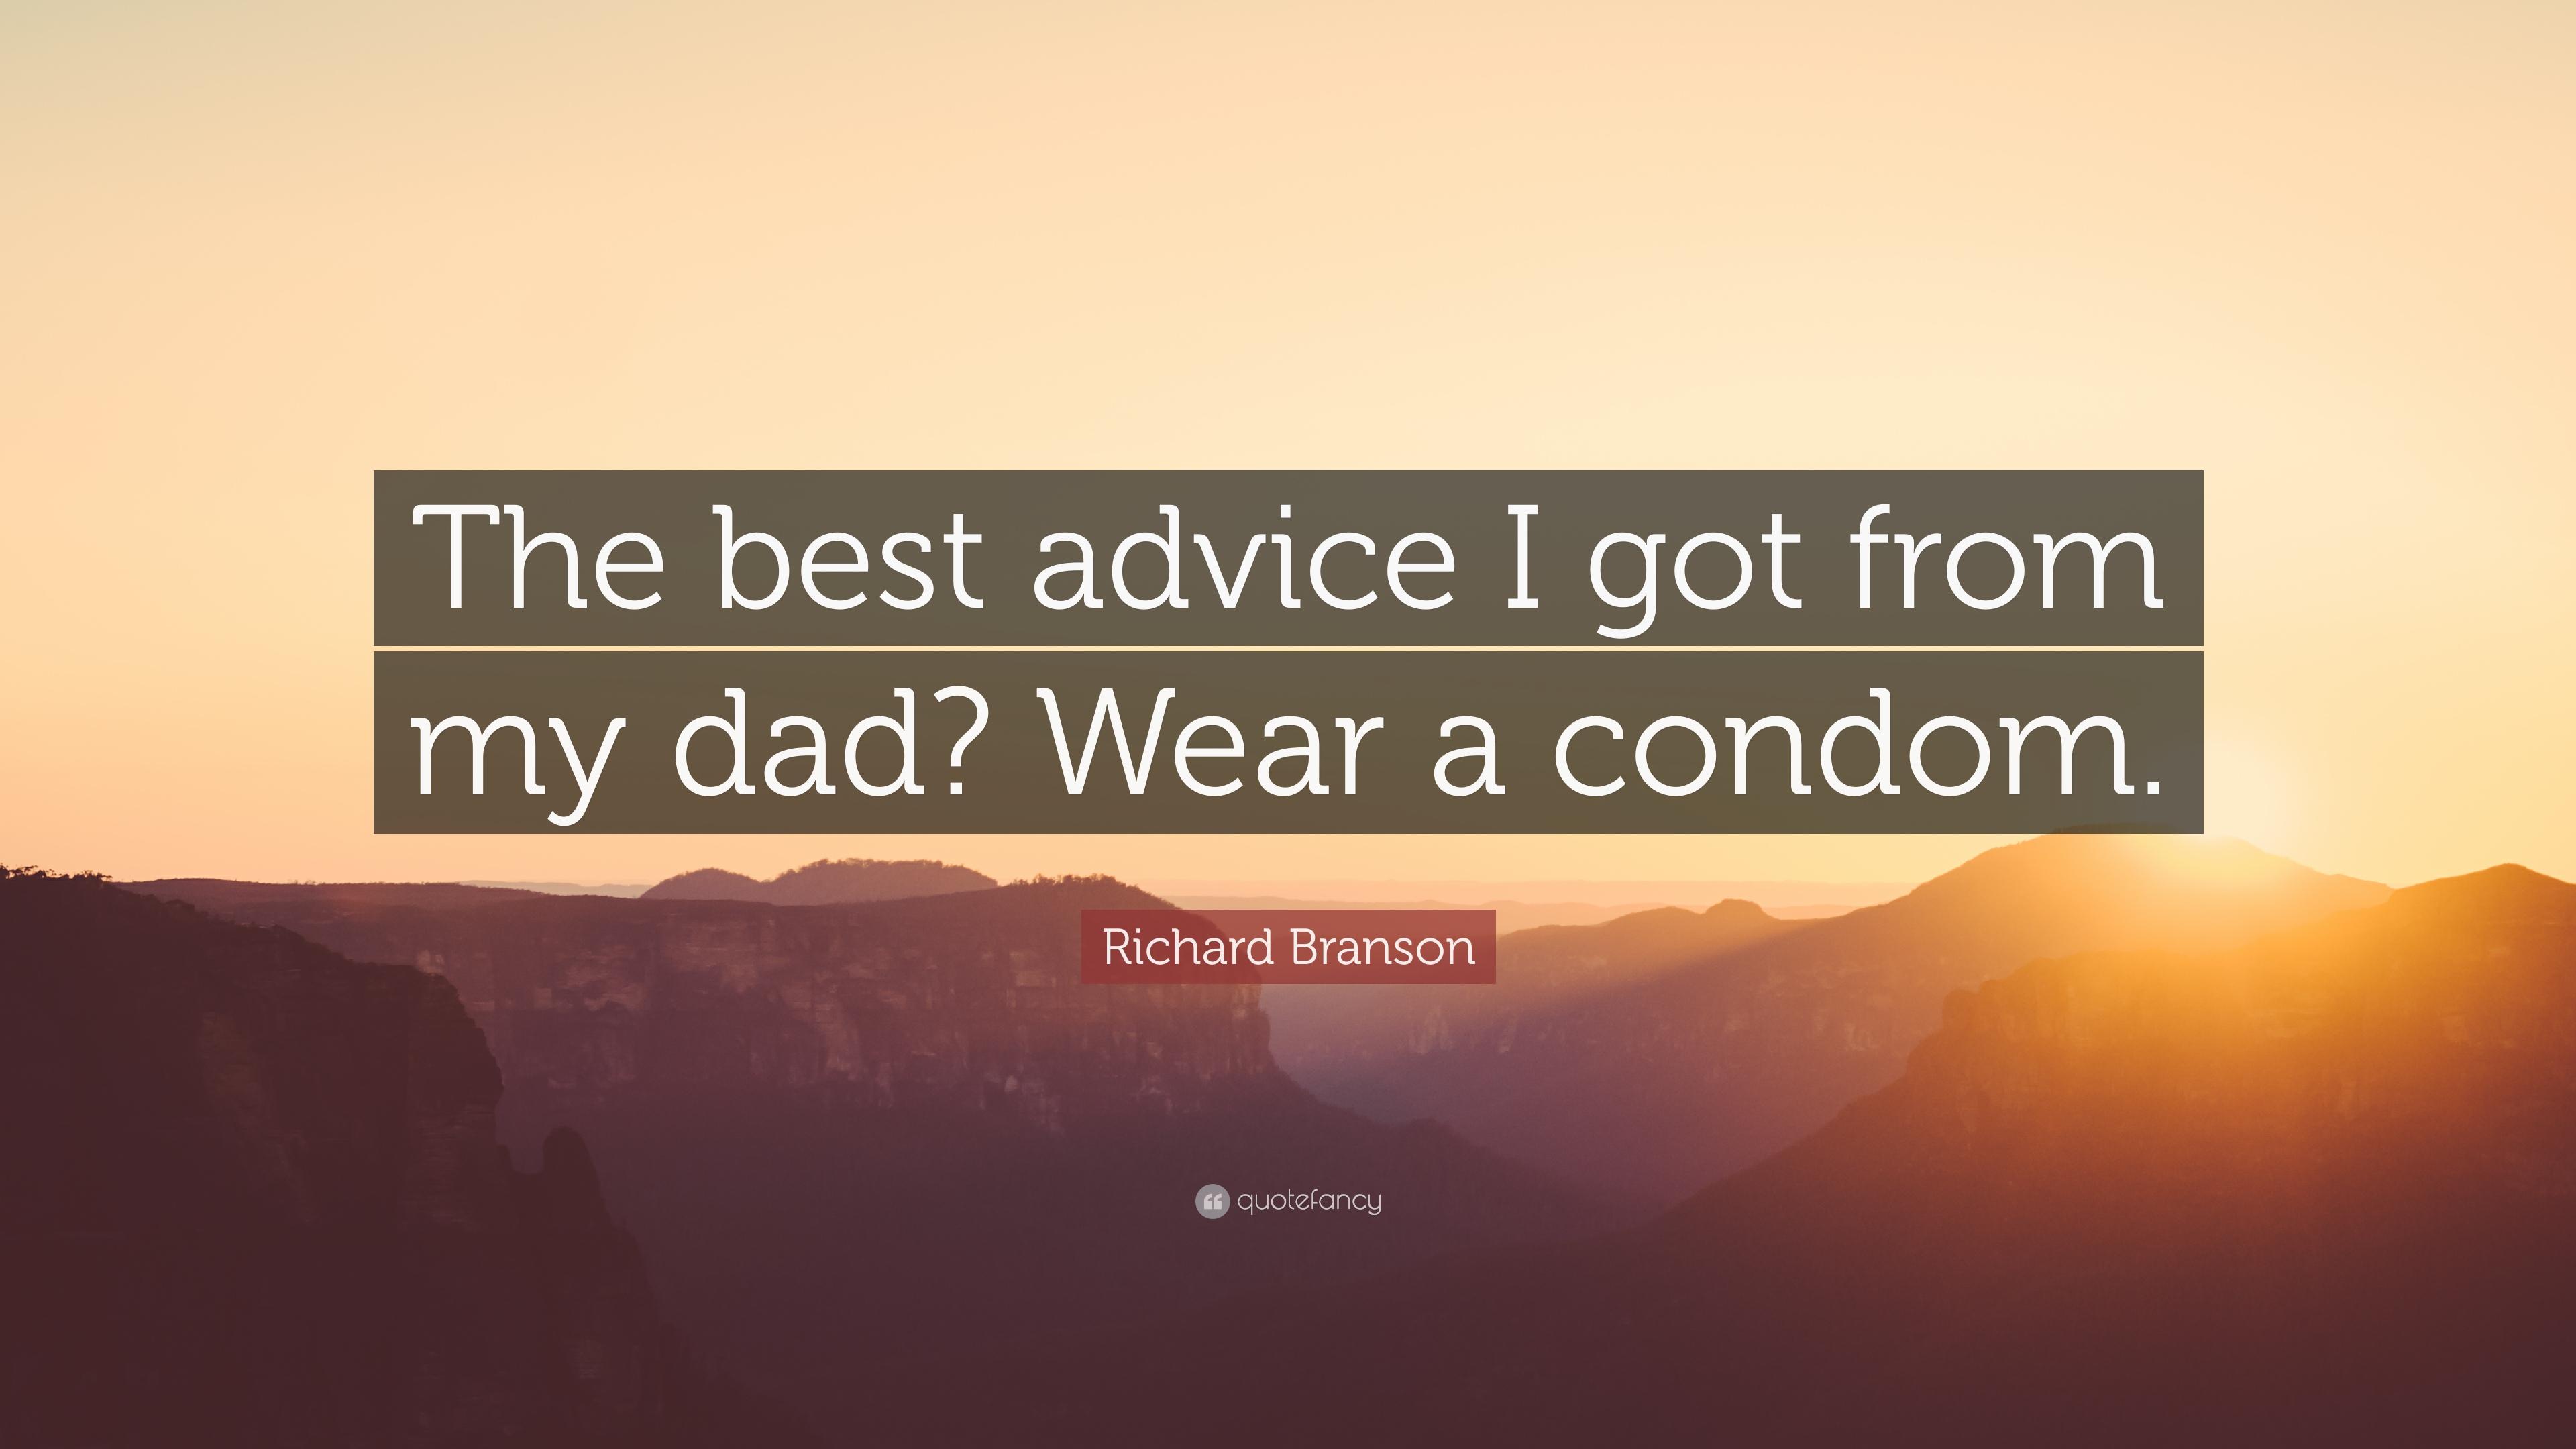 Richard Branson Quote: “The best advice I got from my dad? Wear a